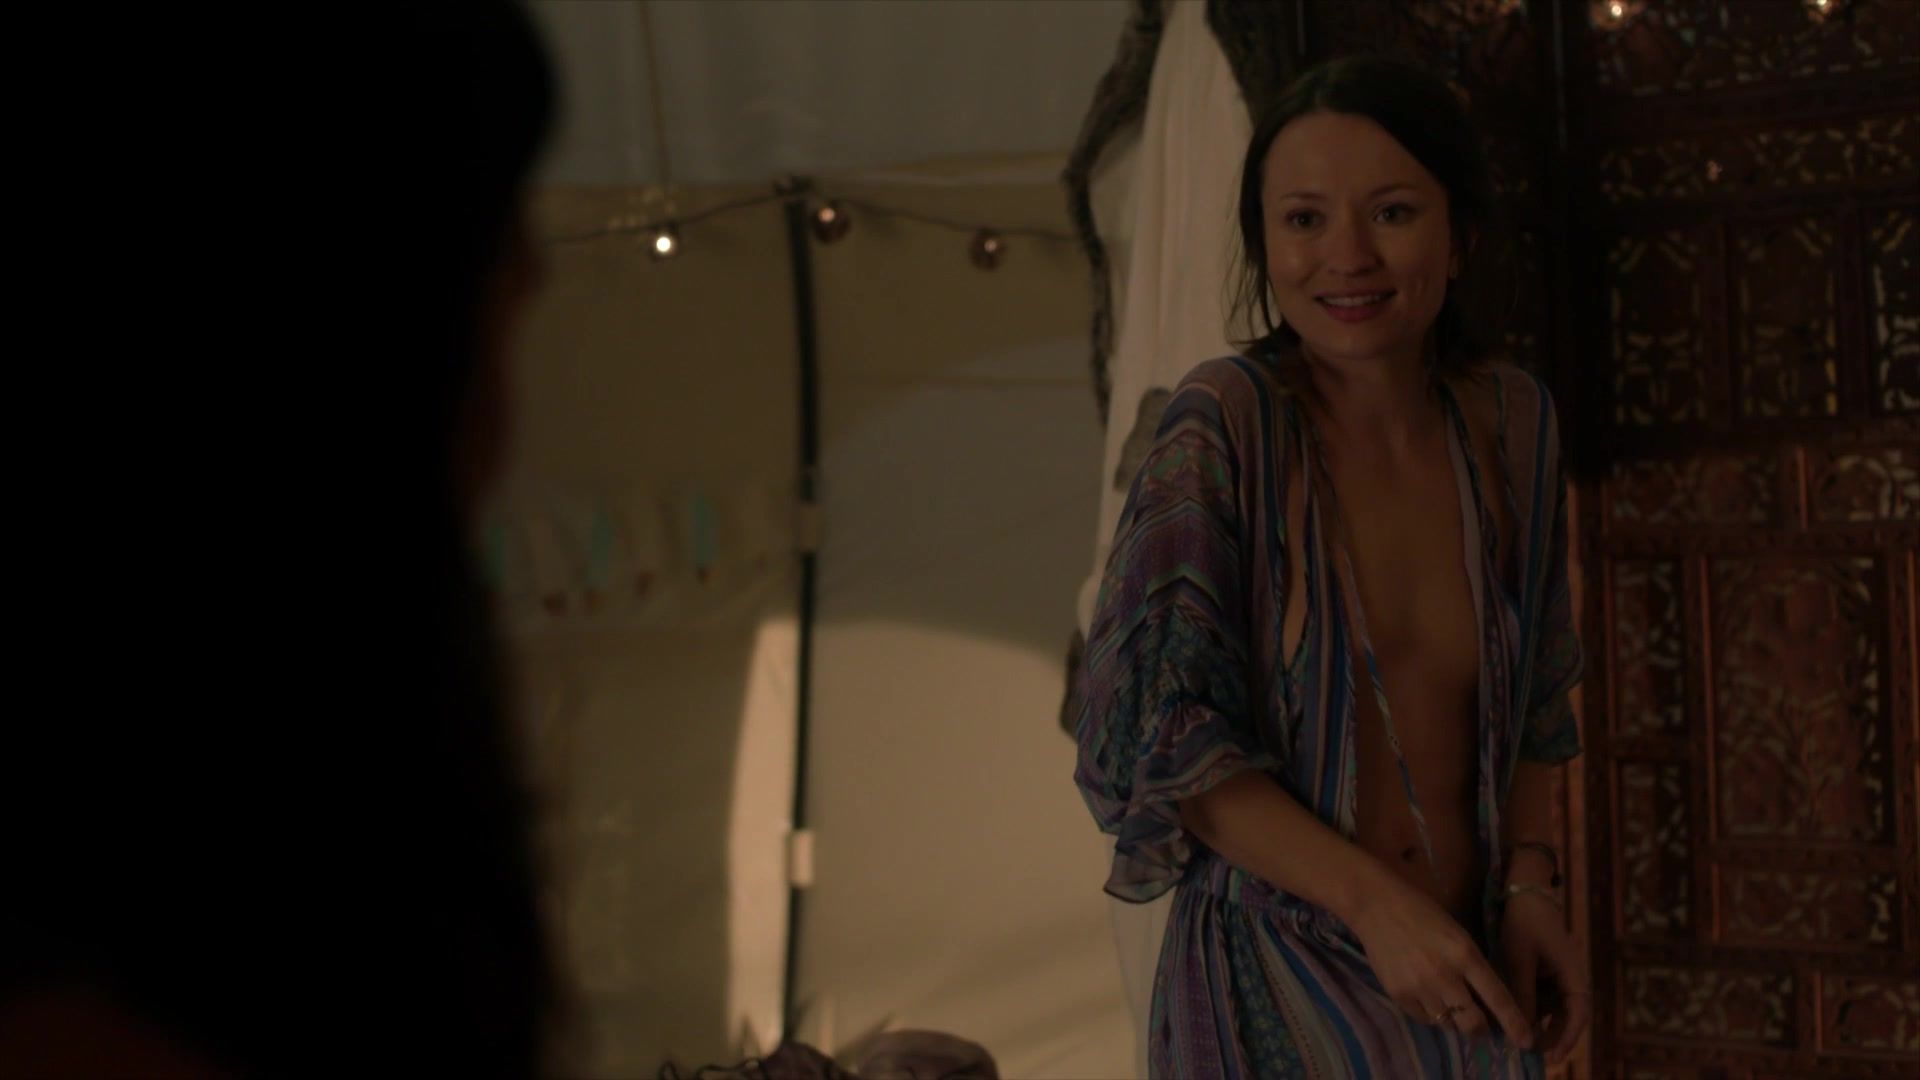 MadThumbs Emily Browning, Maura Tierney nude - The Affair s04e07 (2018) Black penis